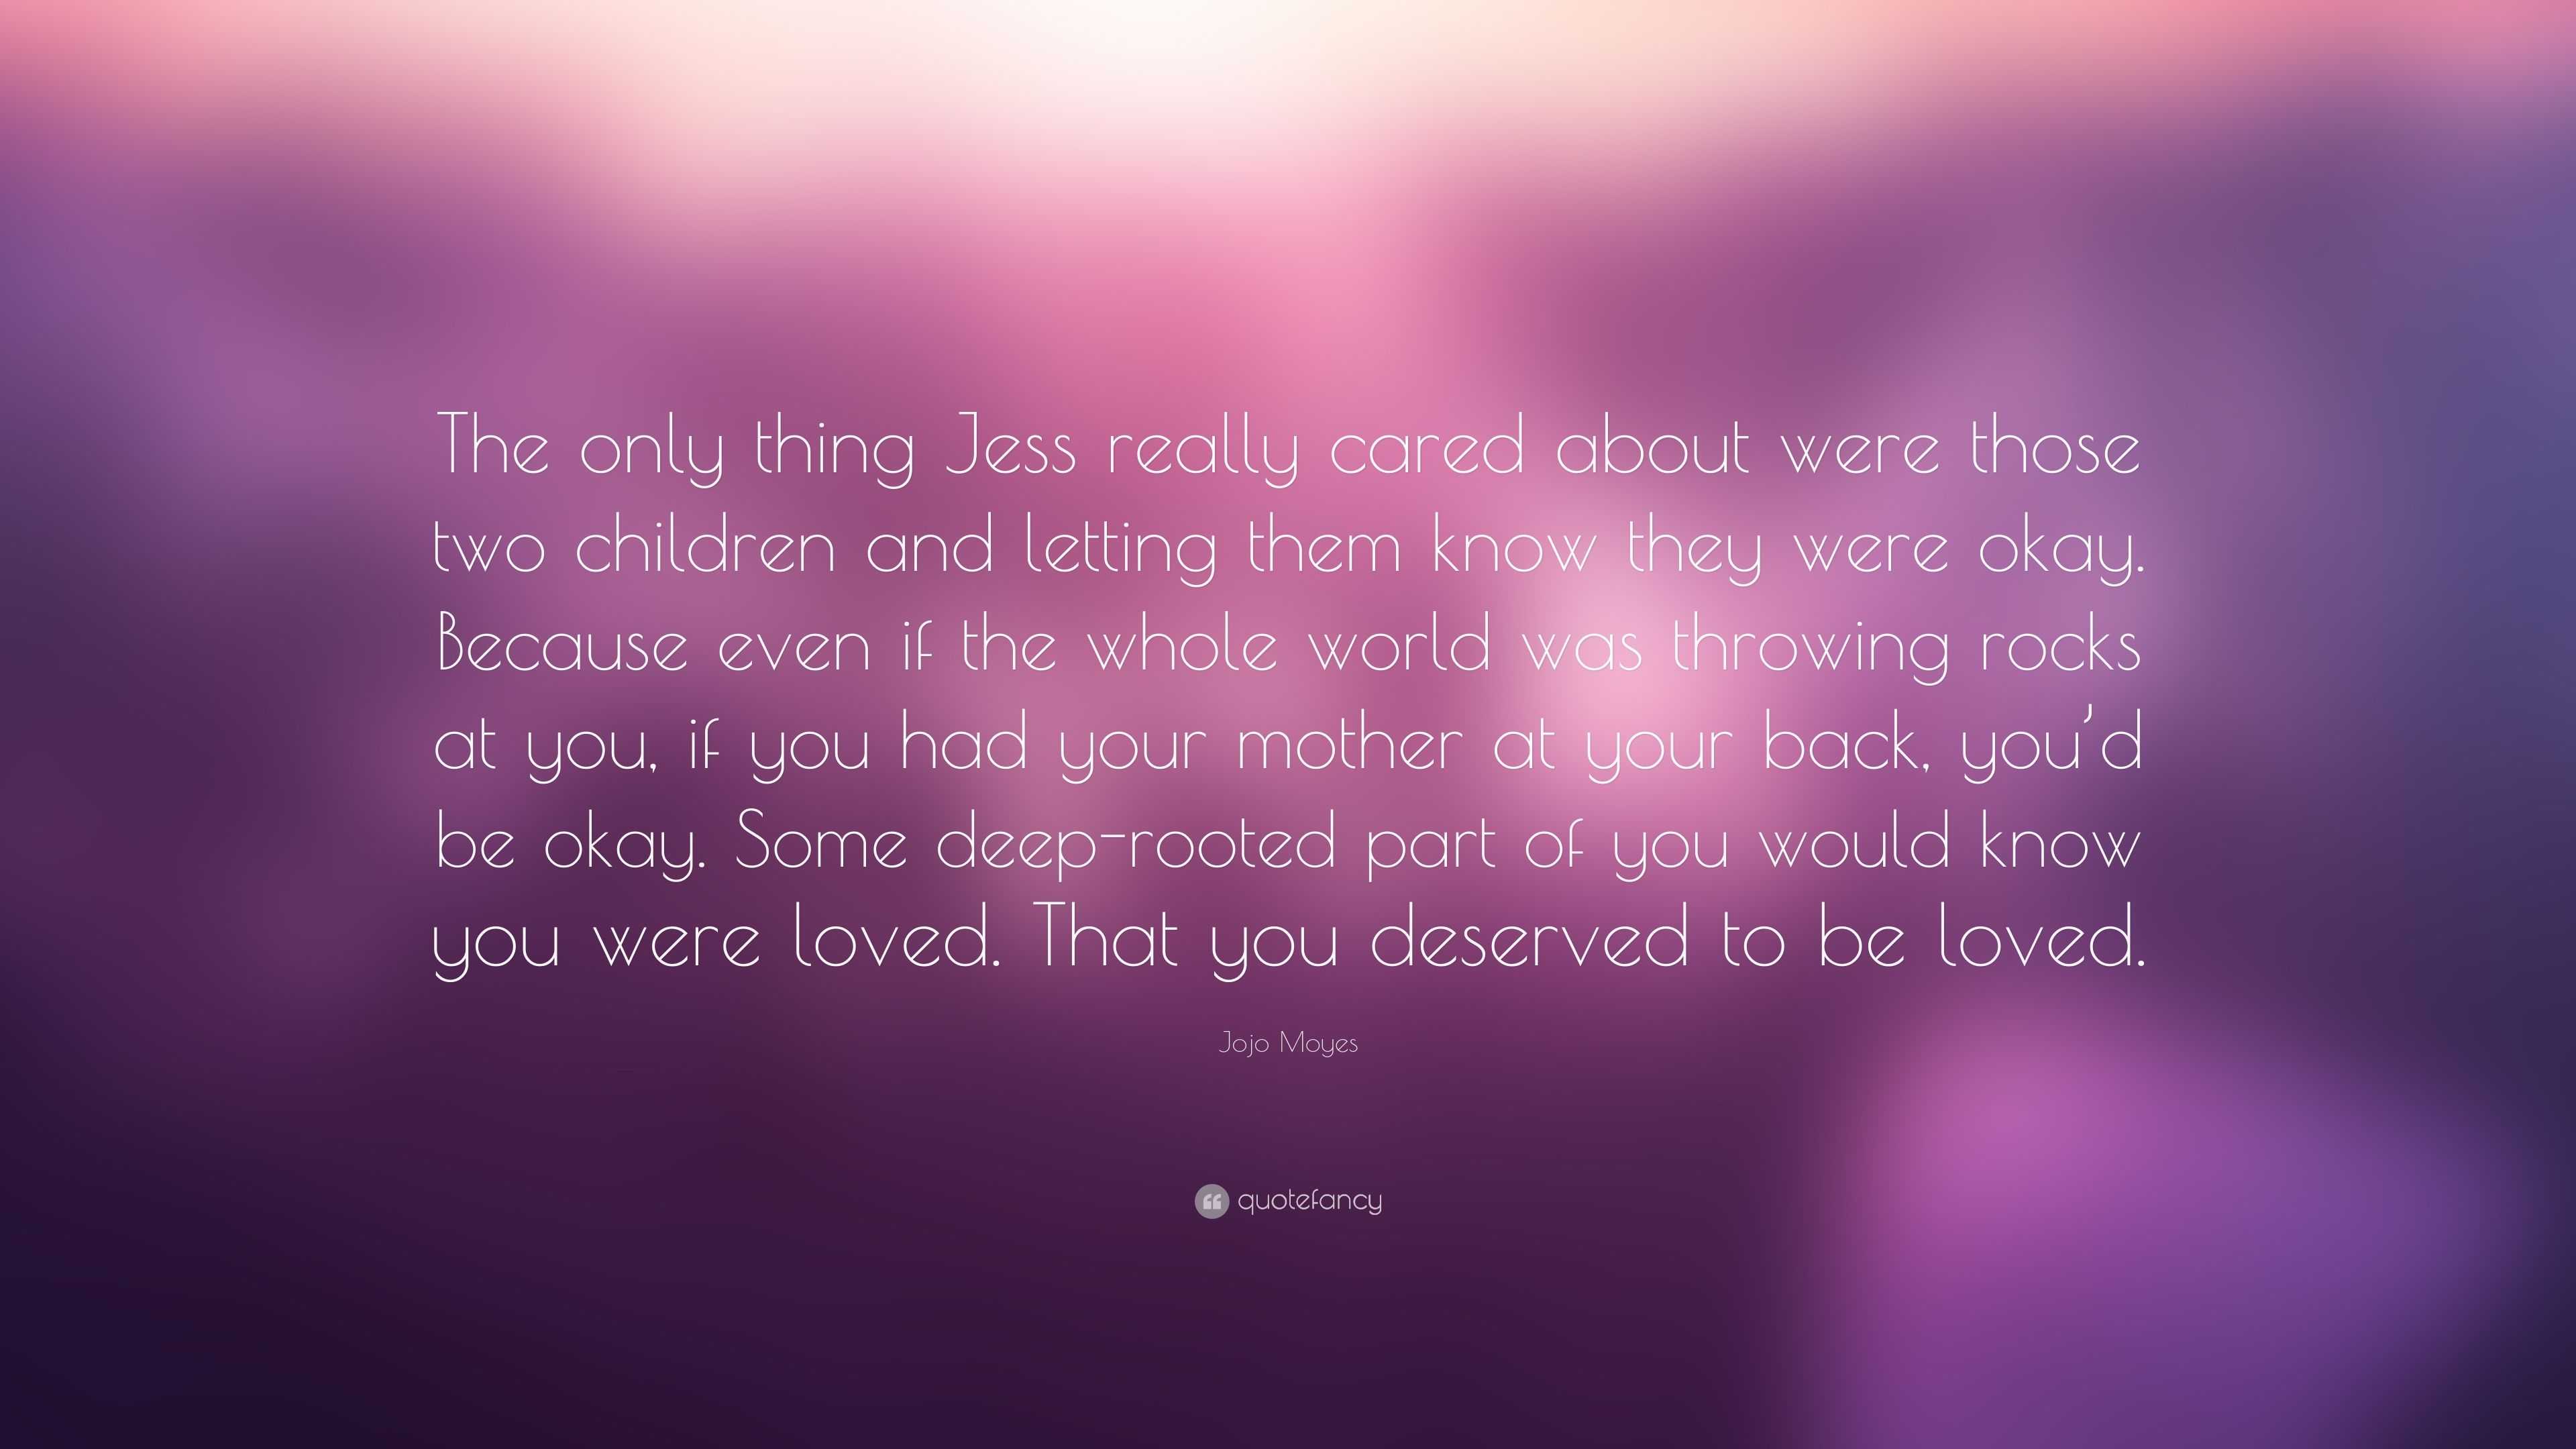 Jojo Moyes Quote: “The only thing Jess really cared about were those ...